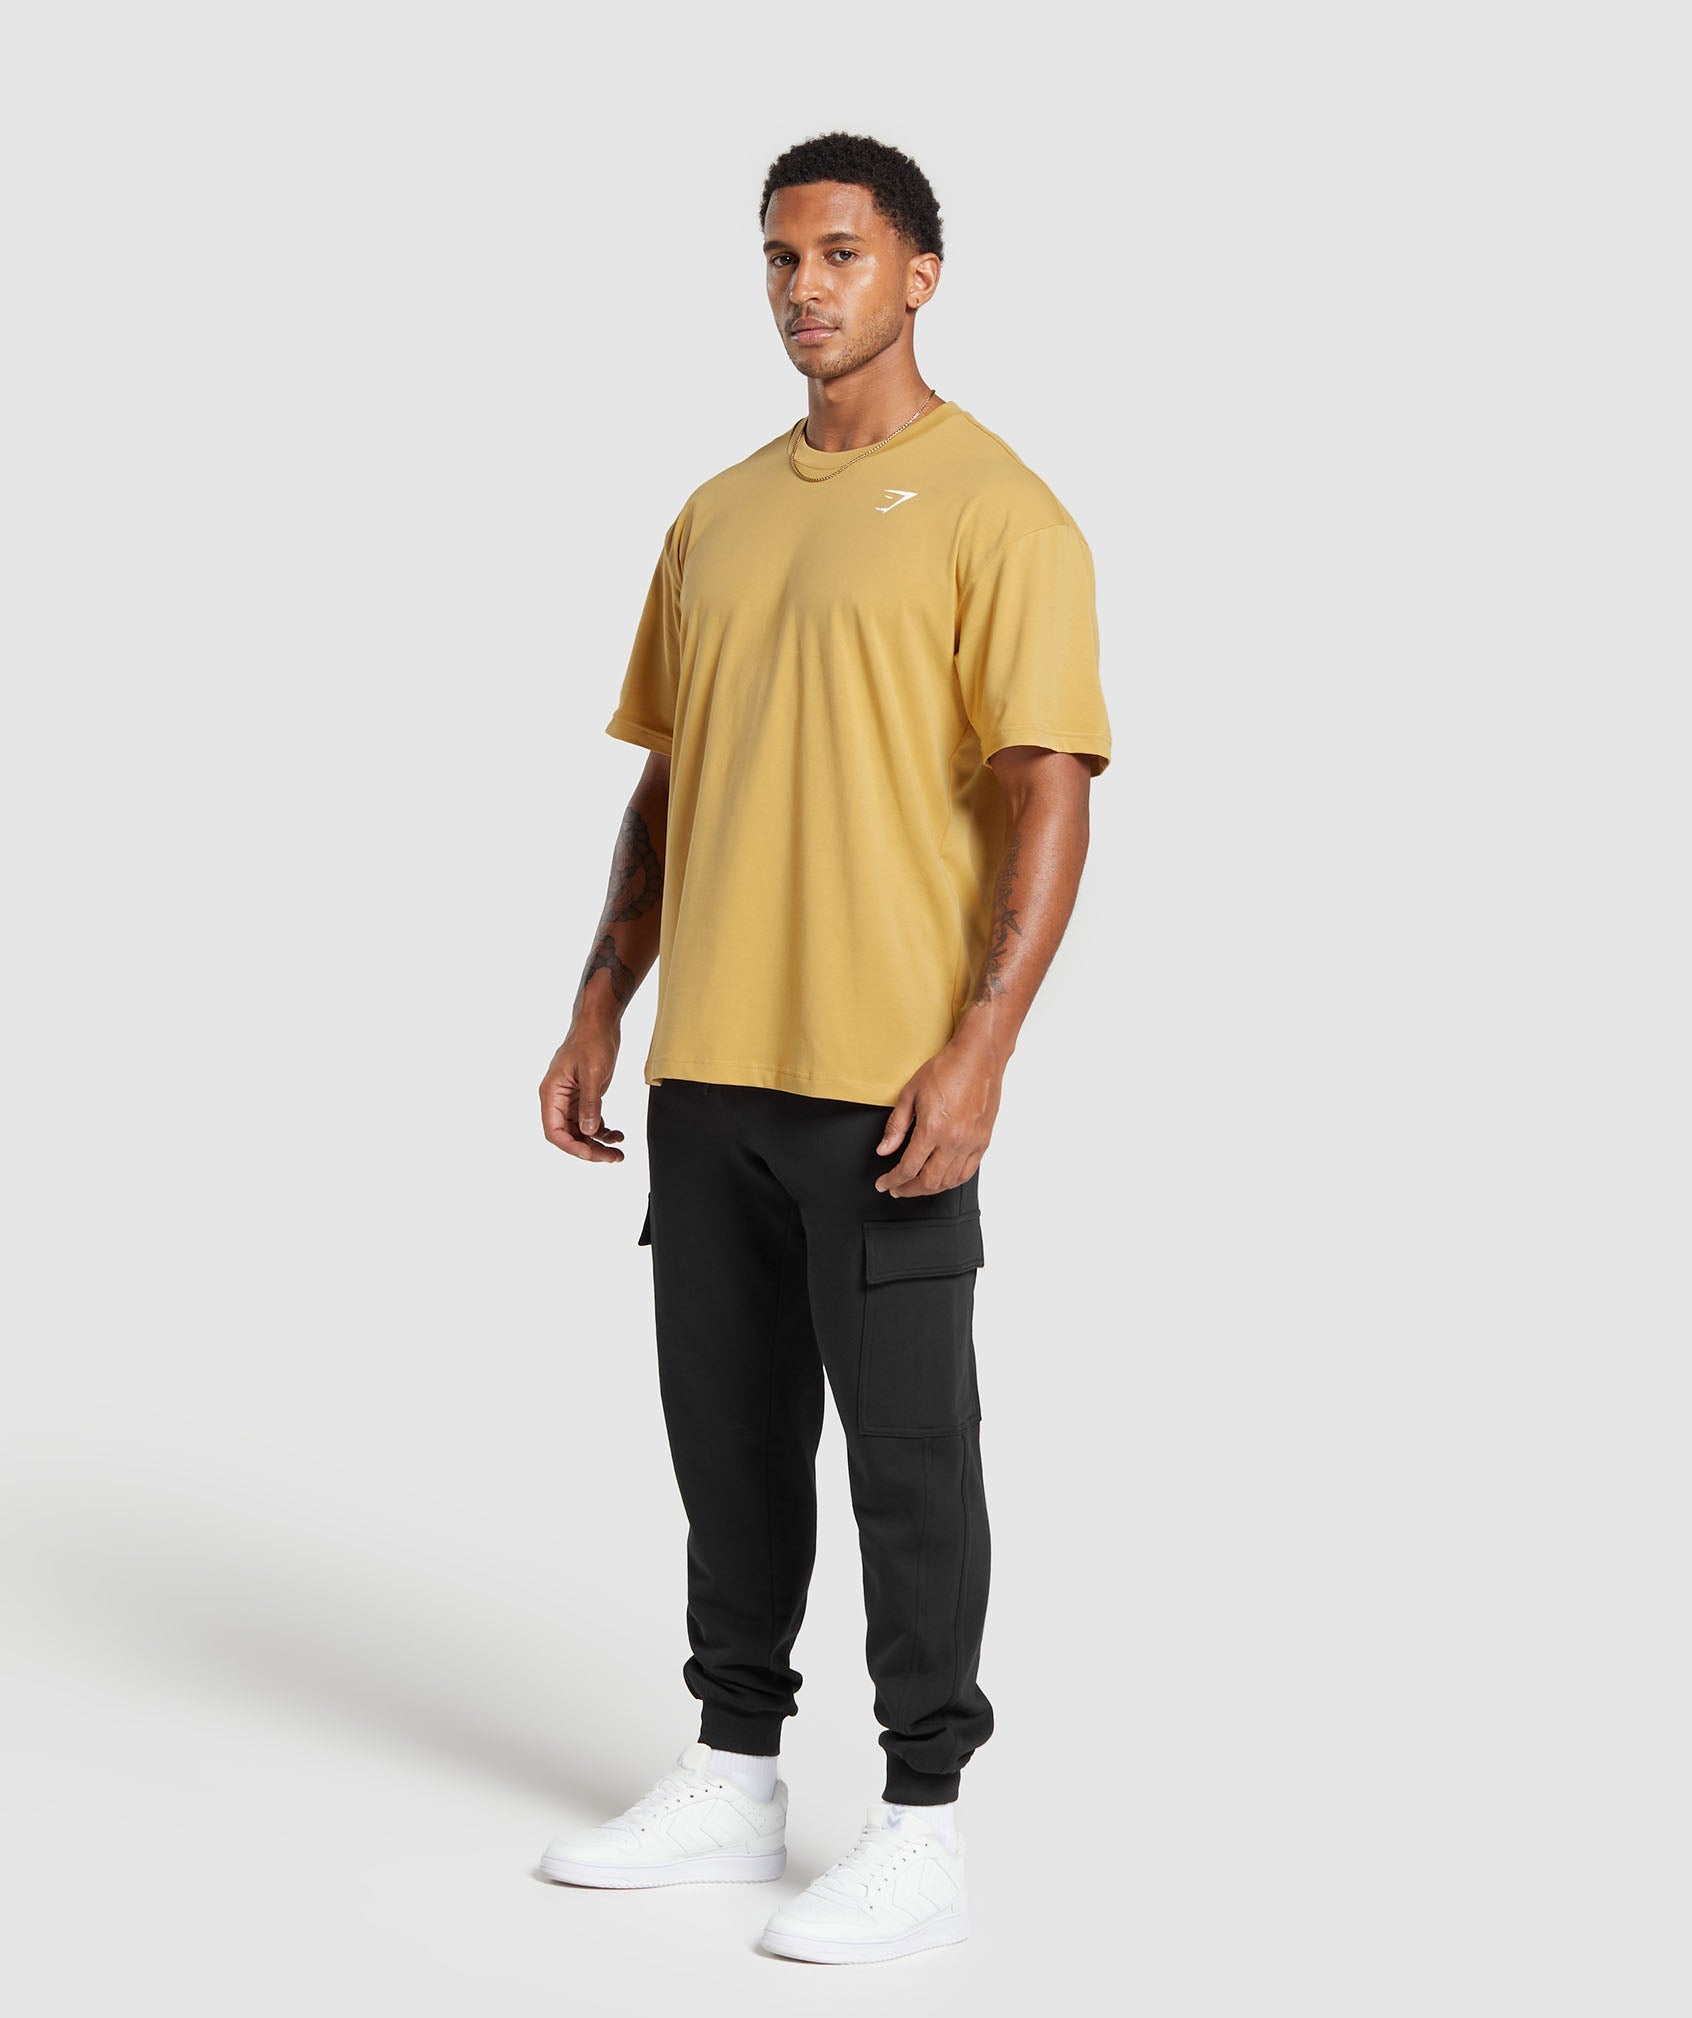 Essential Oversized T-Shirt in Rustic Yellow - view 4